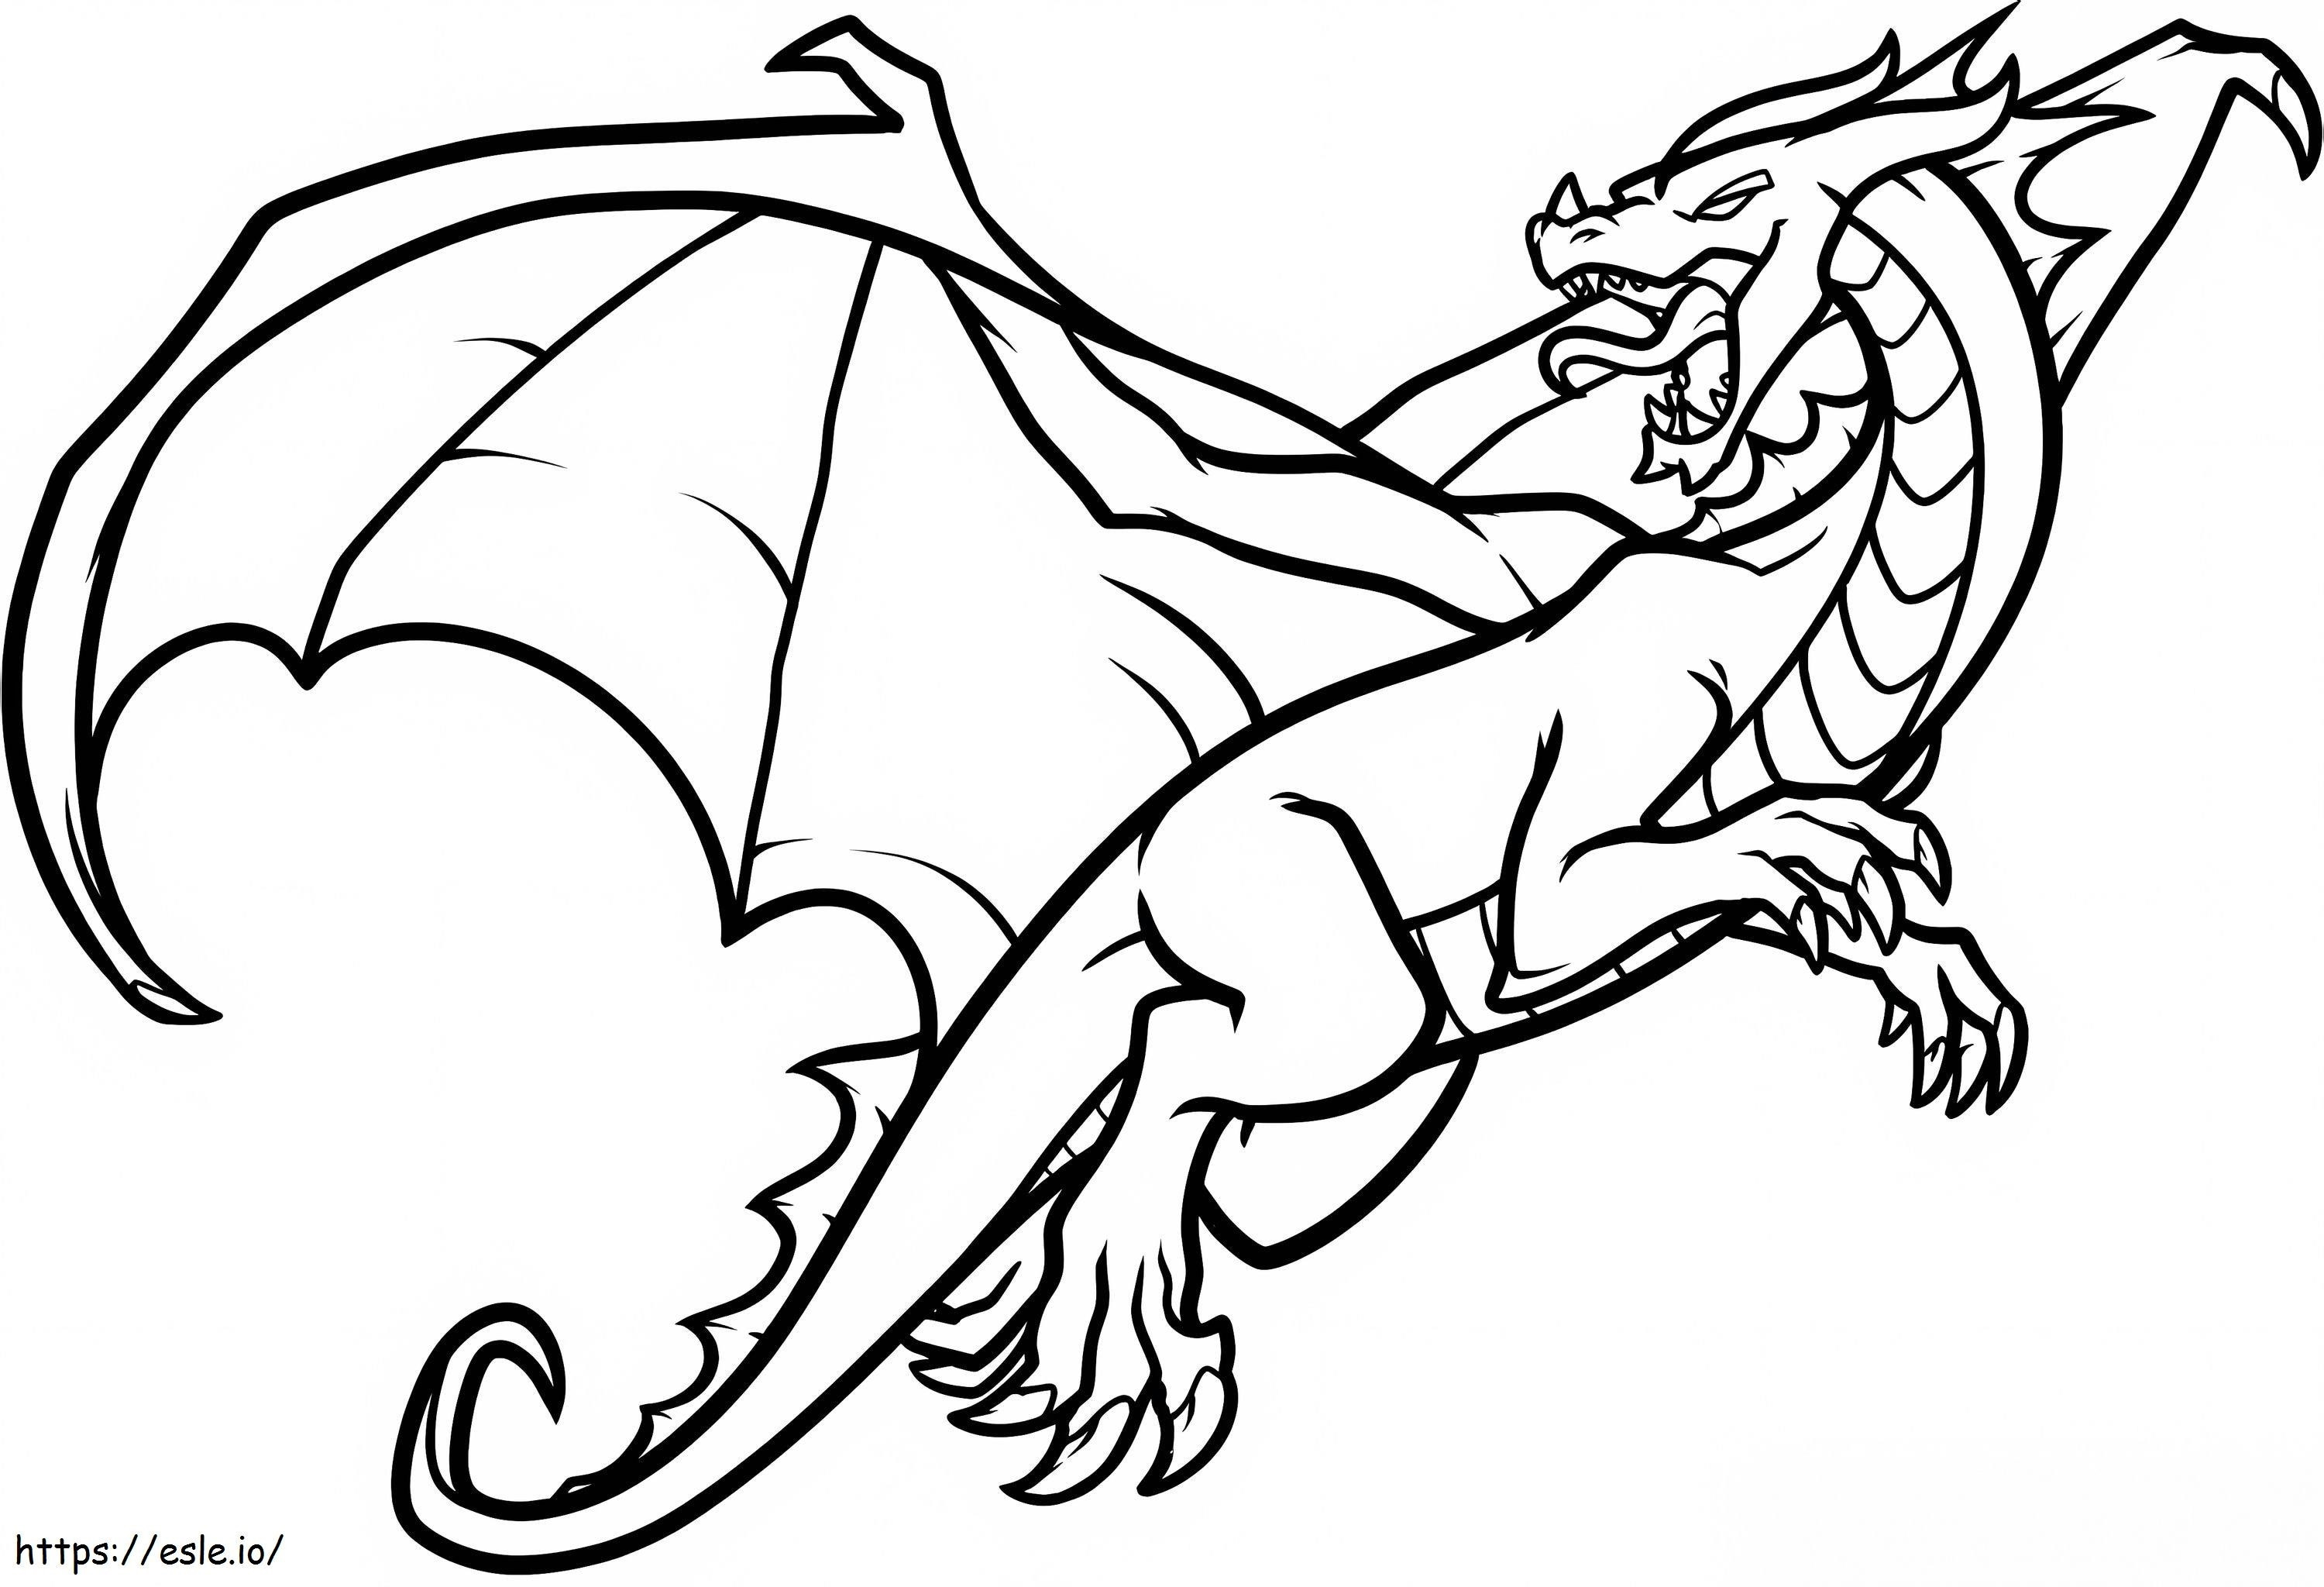 The Dragon Flies coloring page